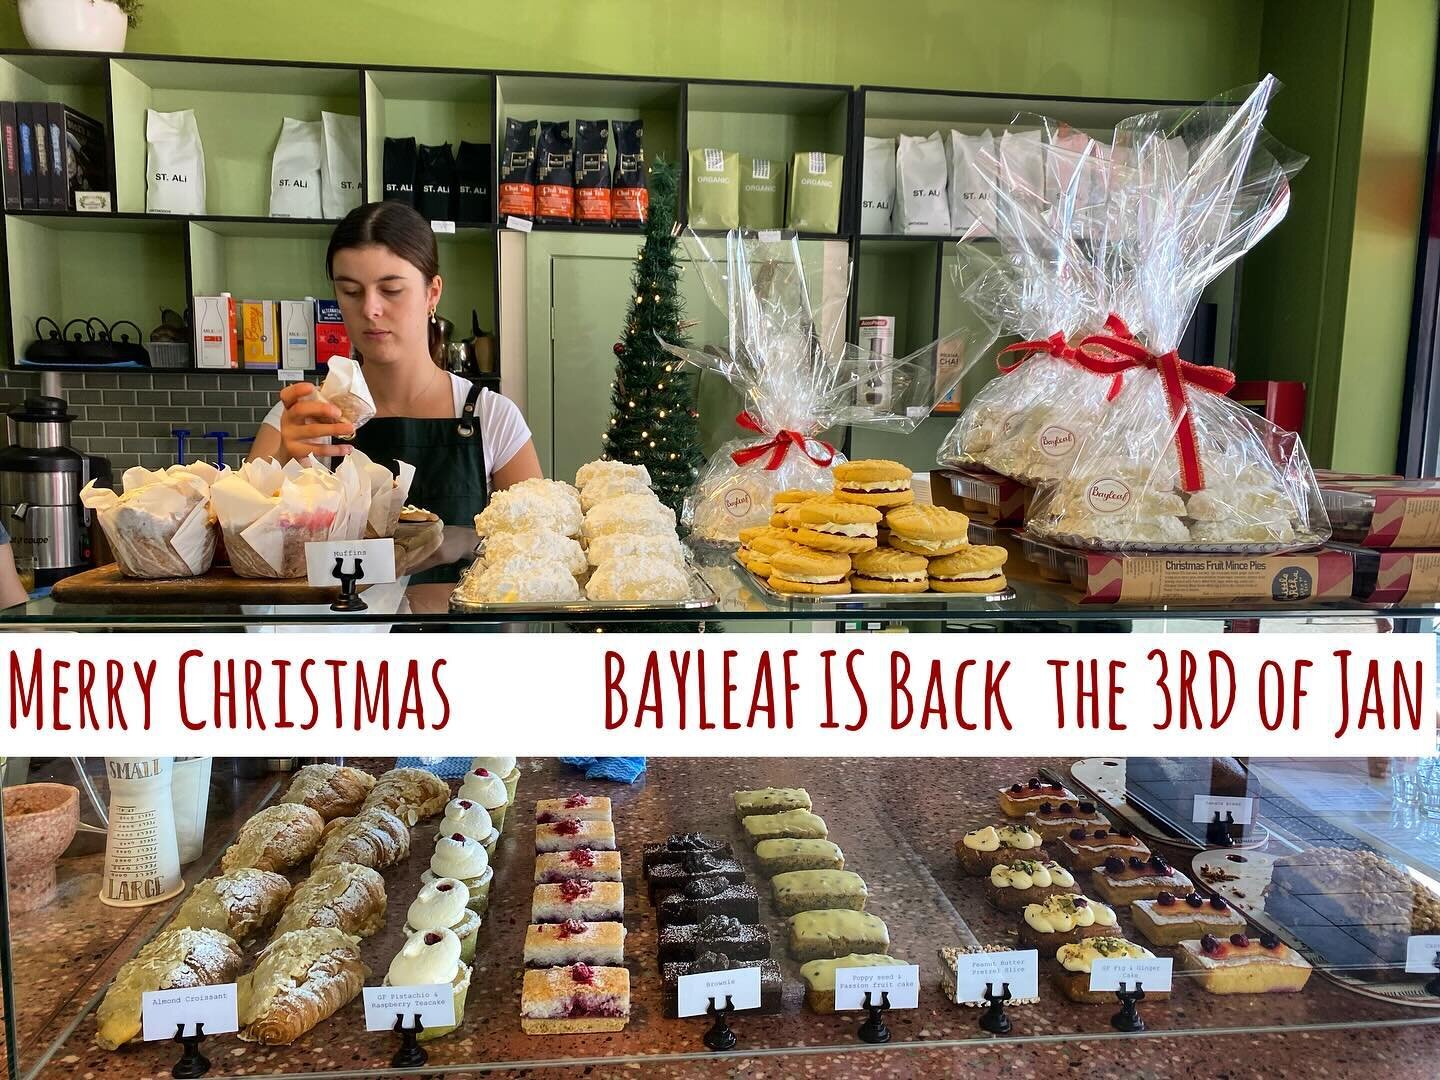 Merry Christmas to everyone!
A big thank you to everyone that supported us this past year!🙏🏻 BayLeaf will take a short break and will be back on the 3rd of January  See you all then